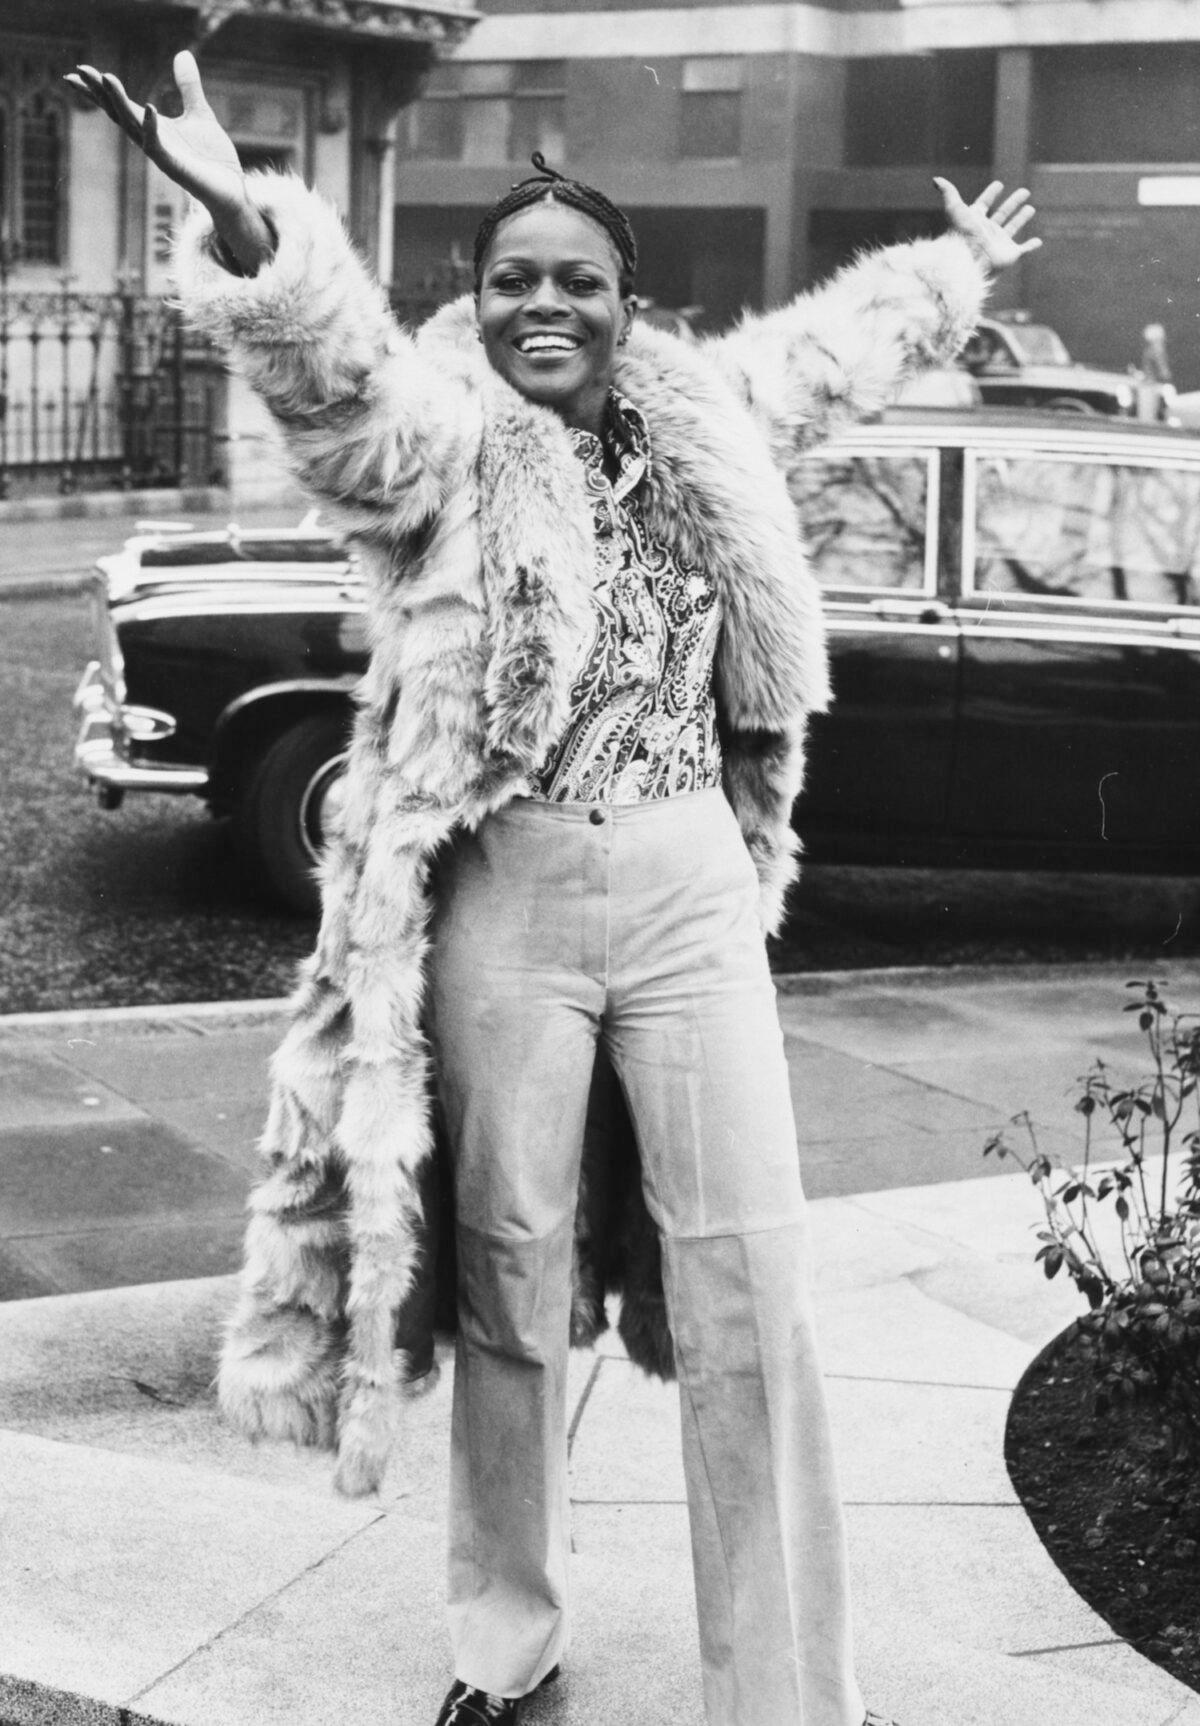 Cicely Tyson in 1973 in London, fresh off her Academy Award nomination for Best Actress (©Getty Images | <a href="https://www.gettyimages.com/detail/news-photo/portrait-of-academy-award-winning-american-actress-cicely-news-photo/575382809?adppopup=true">Dennis Oulds</a>)